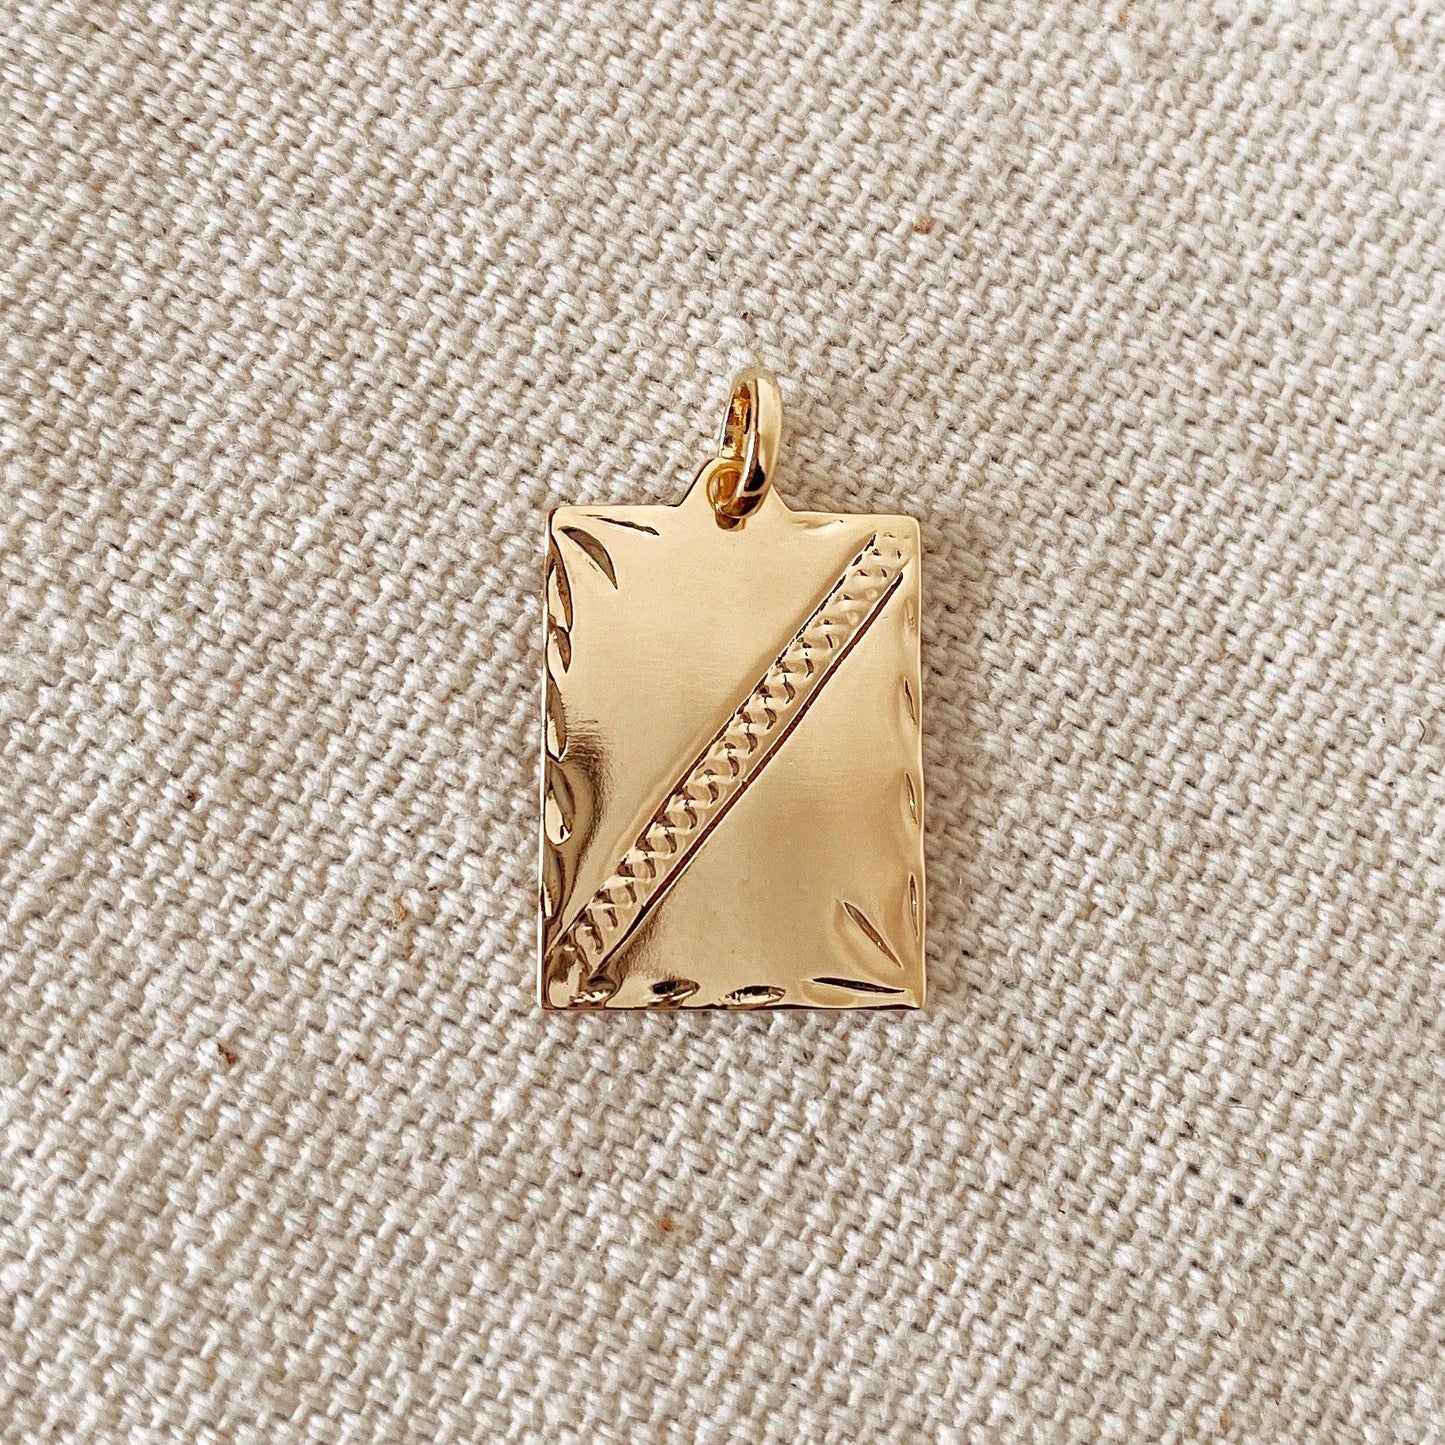 Louis Vuitton Yellow Gold Plated Charm Safety Pin Brooch, Other